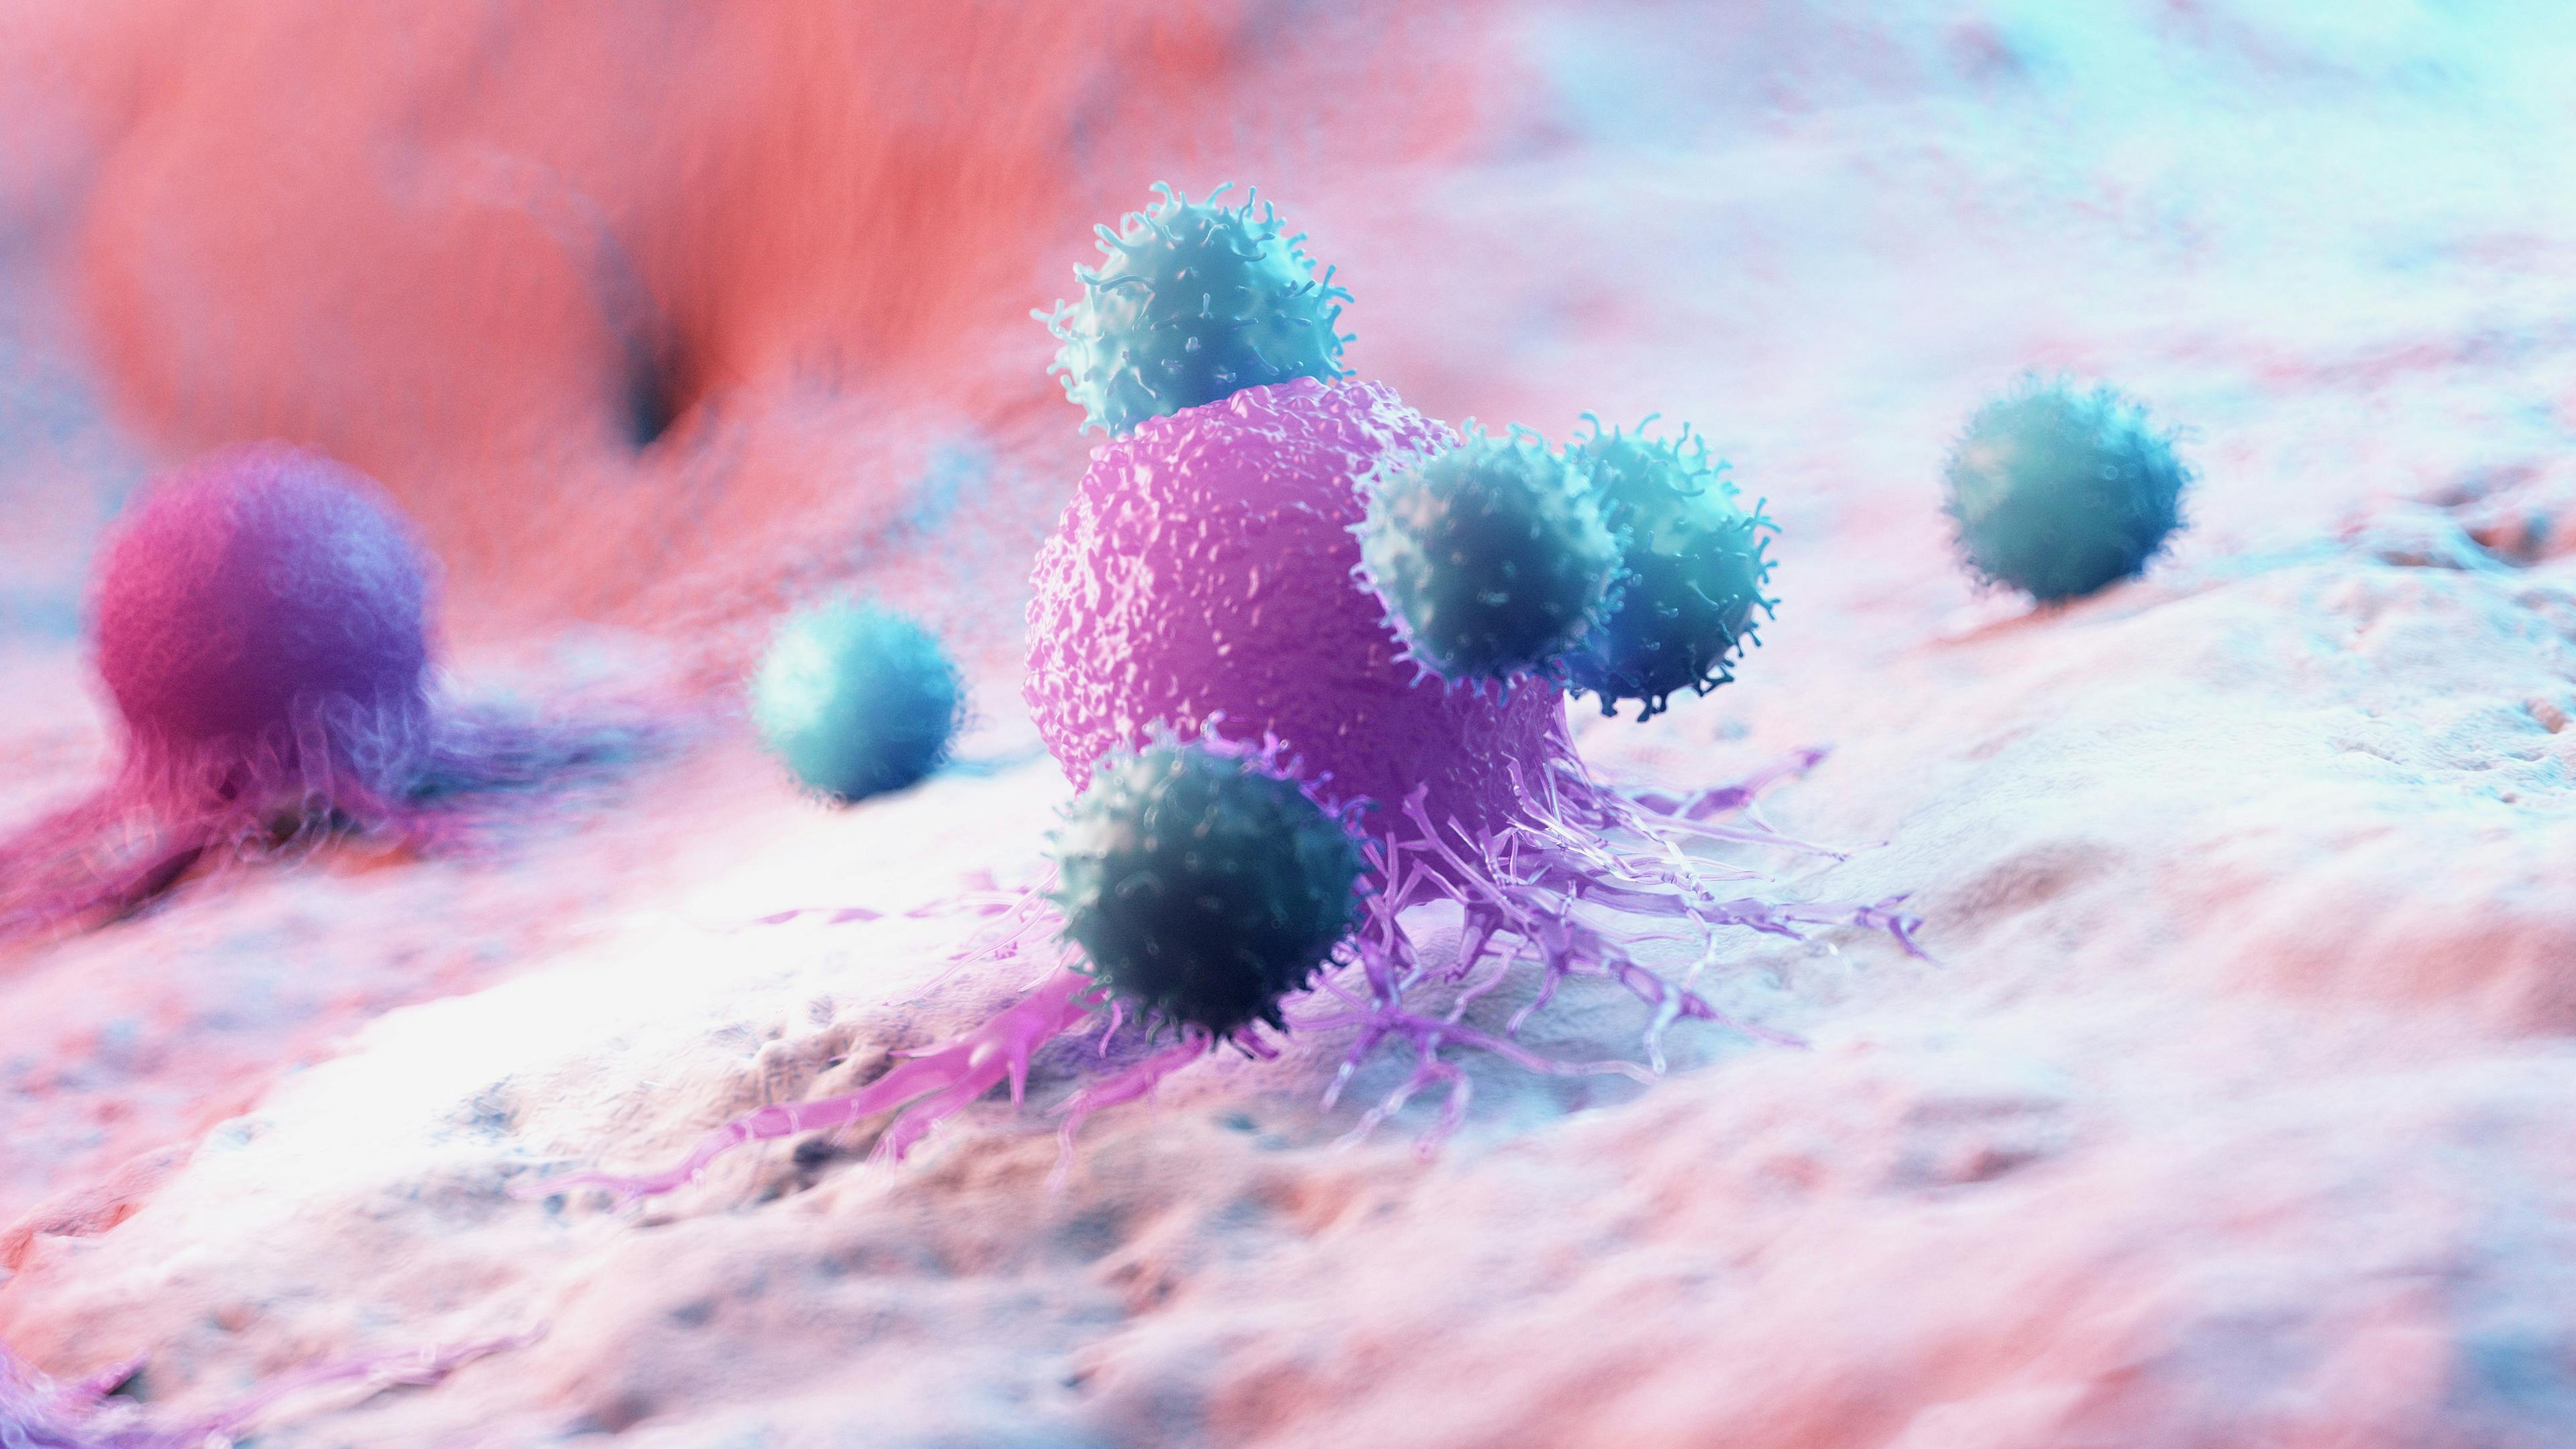 3d rendered medically accurate illustration of leukocytes attacking a cancer cell | © Image Credit: SciePro - www.stock.adobe.com